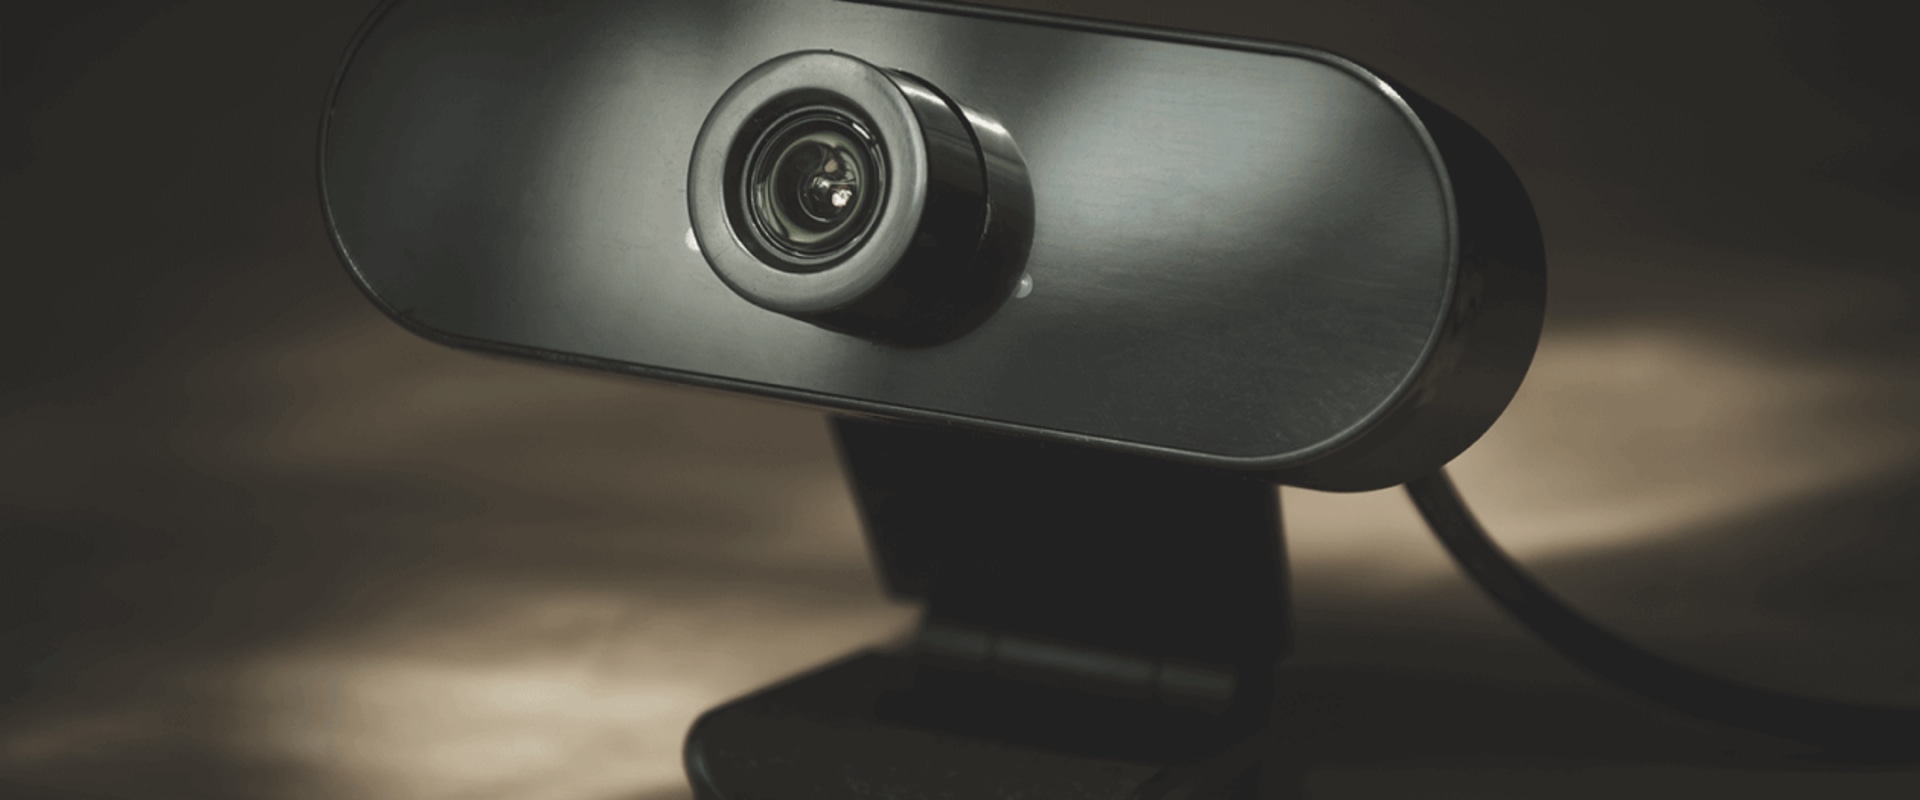 How to Adjust the Frame Rate on Your Webcam